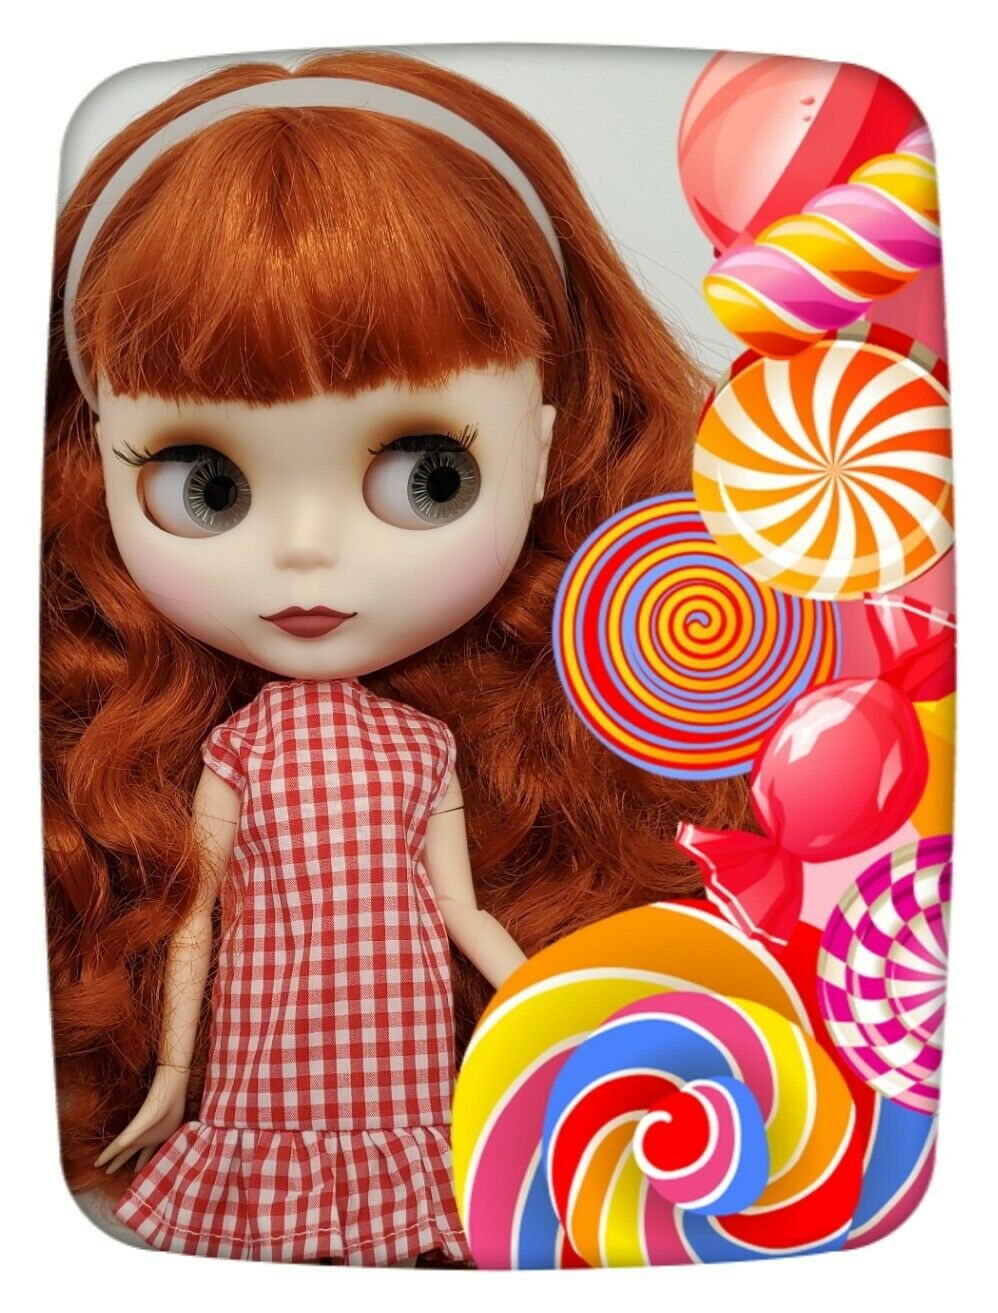 Factory Type Neo Blythe Doll Orange Red Hair, Jointed, Outfit, Stand, Accessory